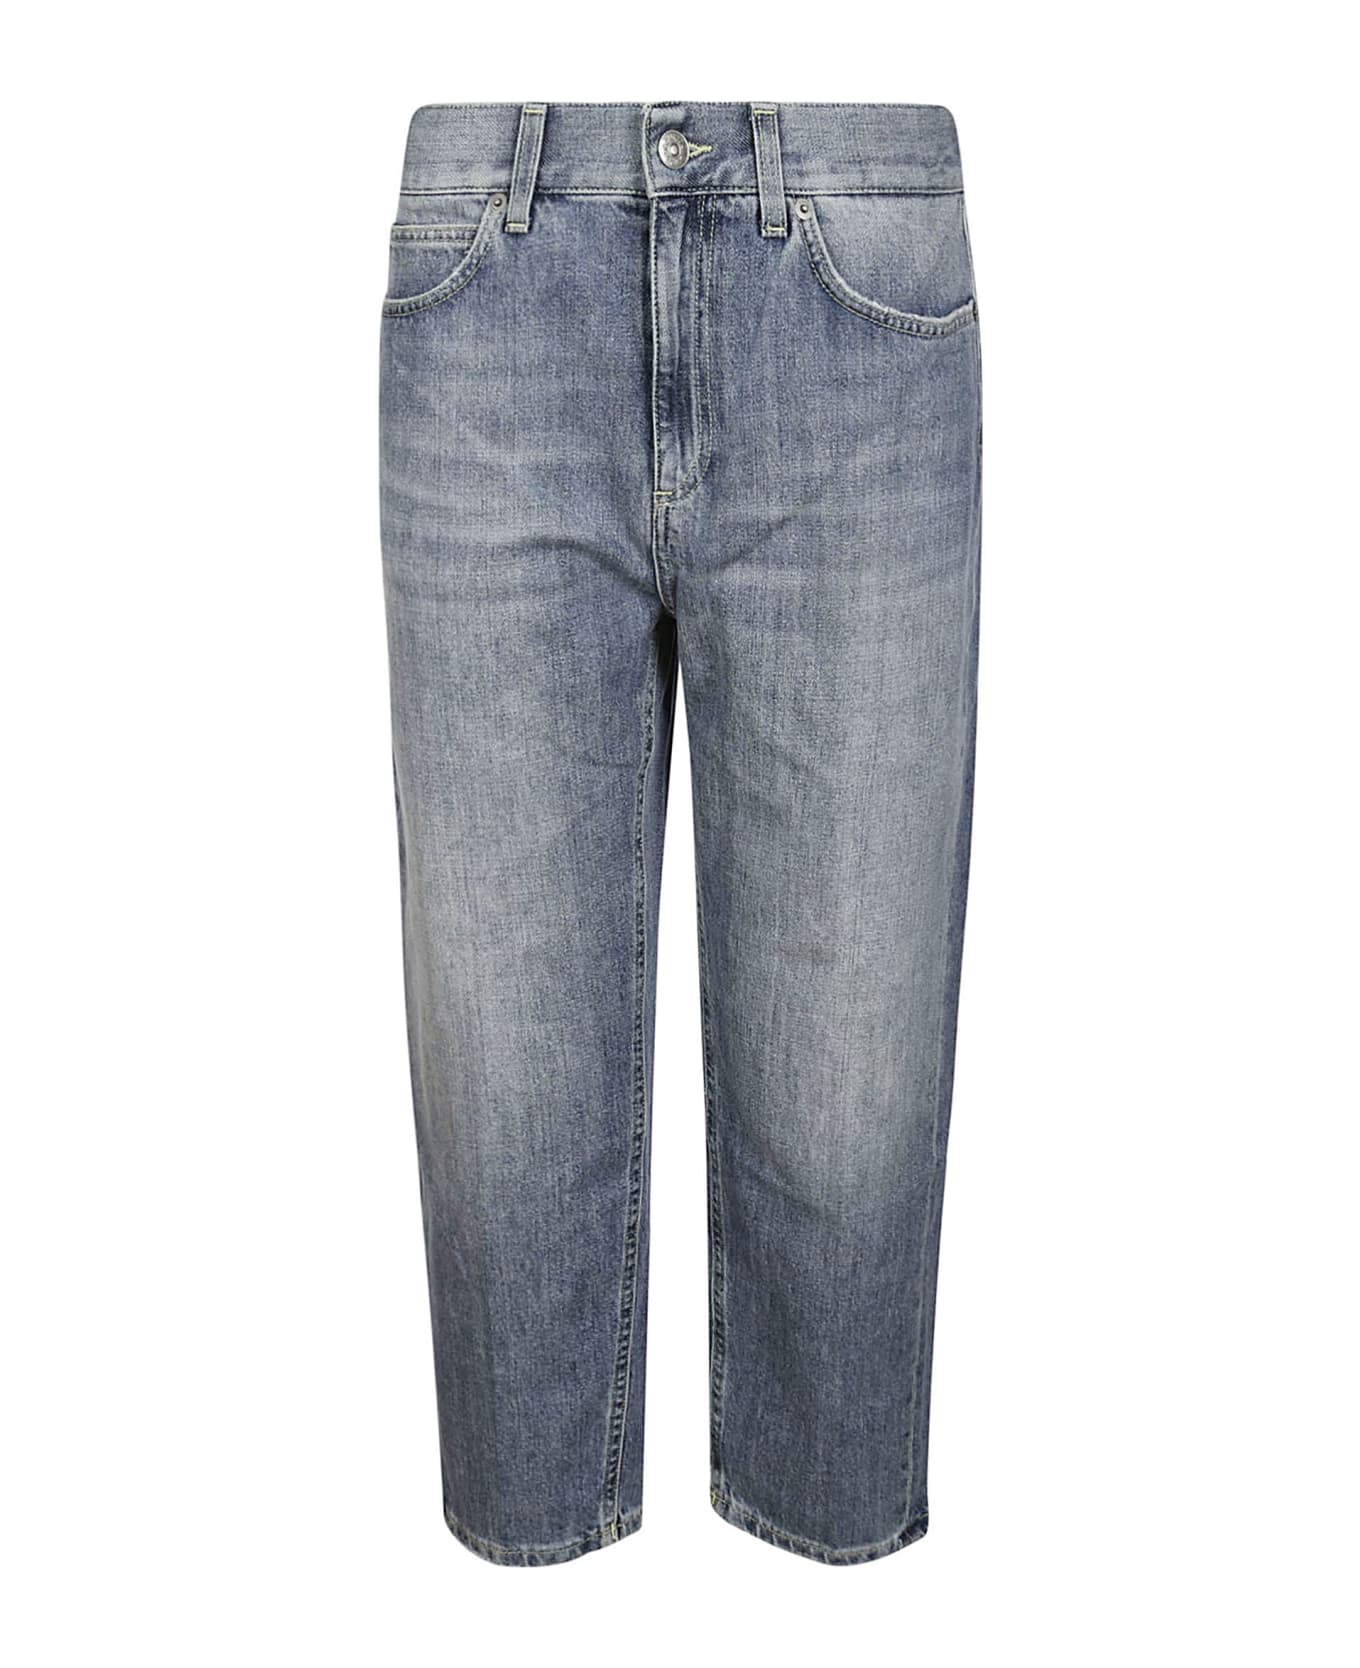 Dondup 'carrie' Jeans - BLUE デニム